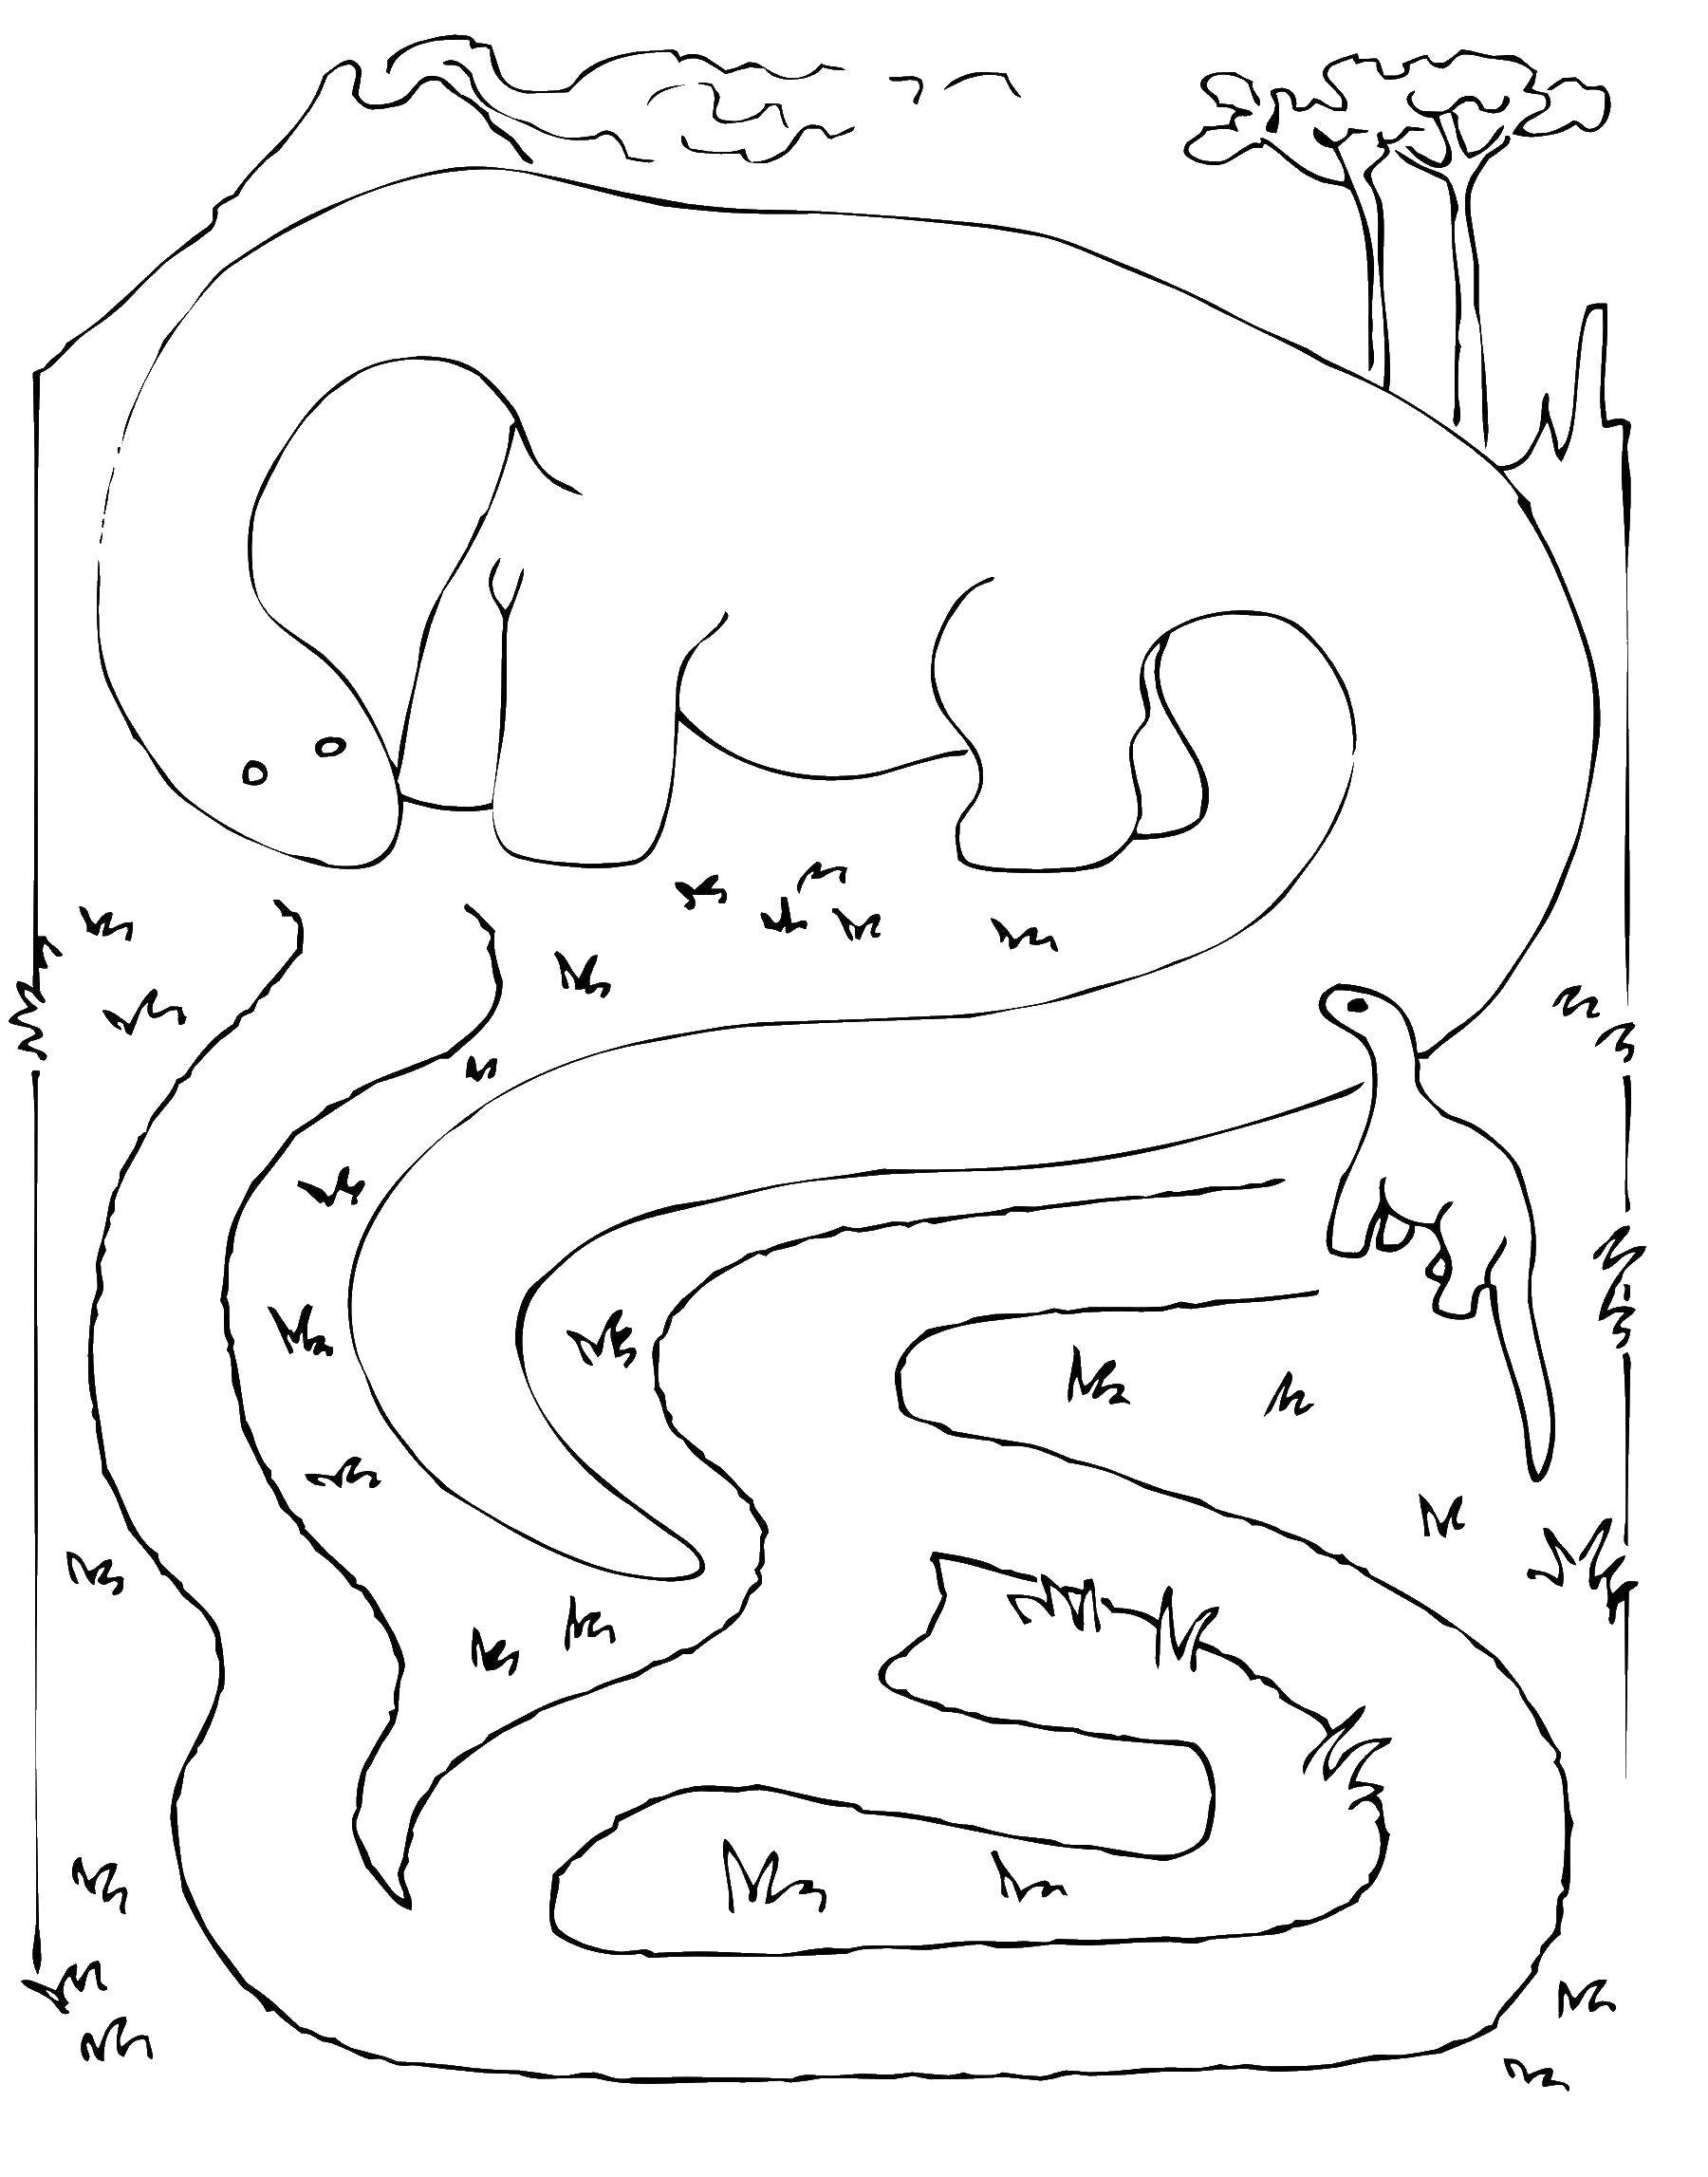 Coloring Help the dinosaur to go. Category mazes. Tags:  Maze, logic.